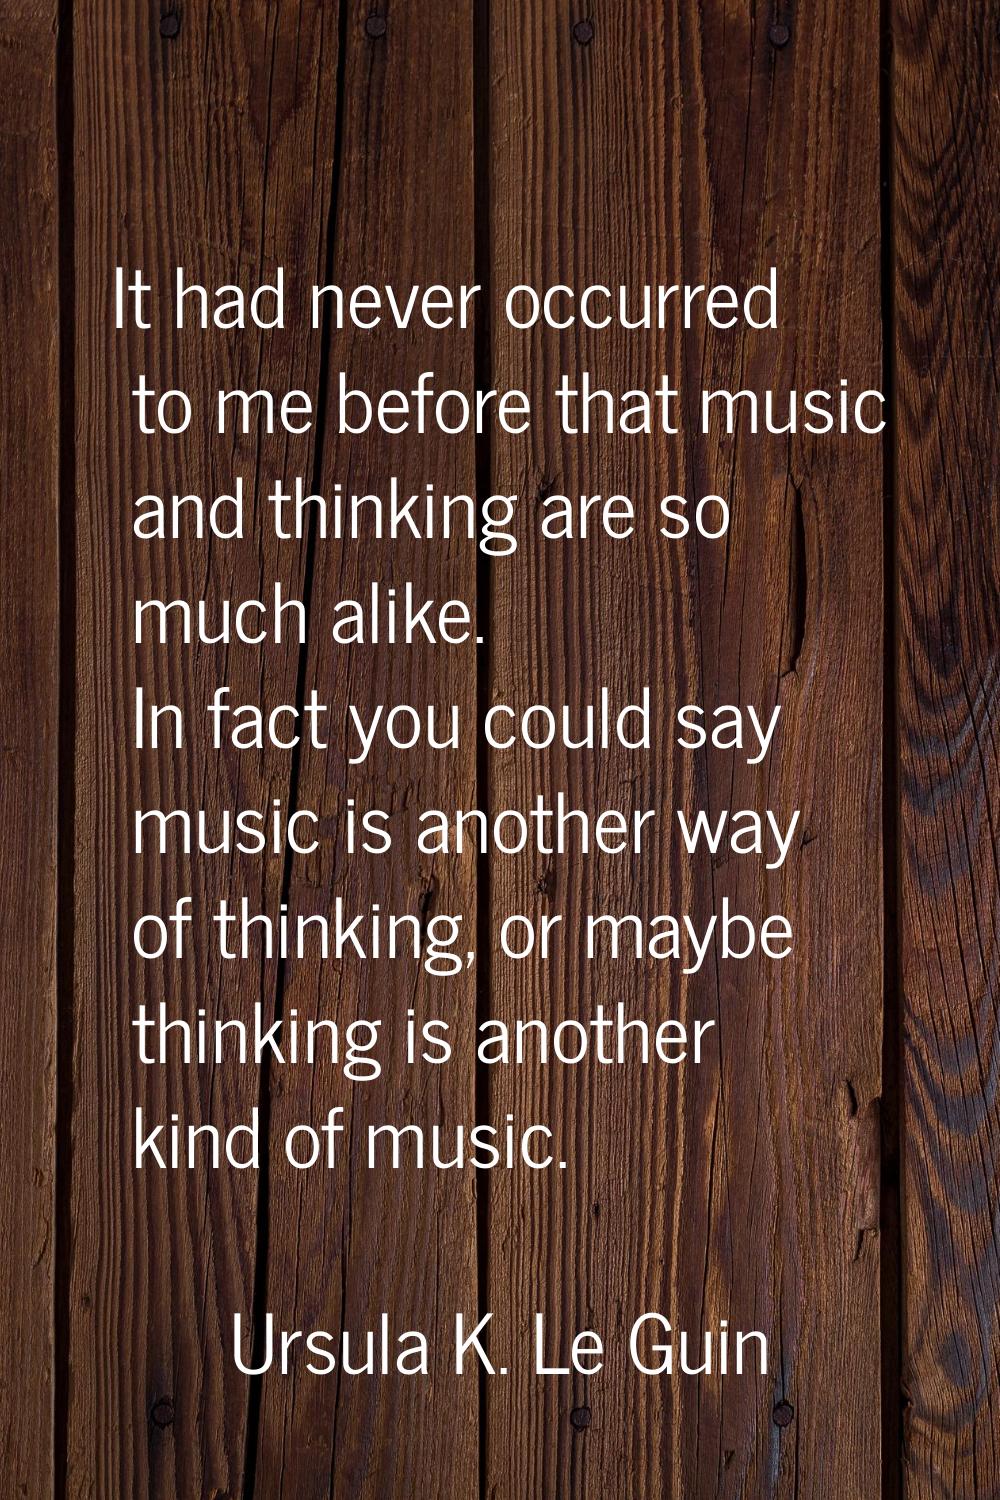 It had never occurred to me before that music and thinking are so much alike. In fact you could say